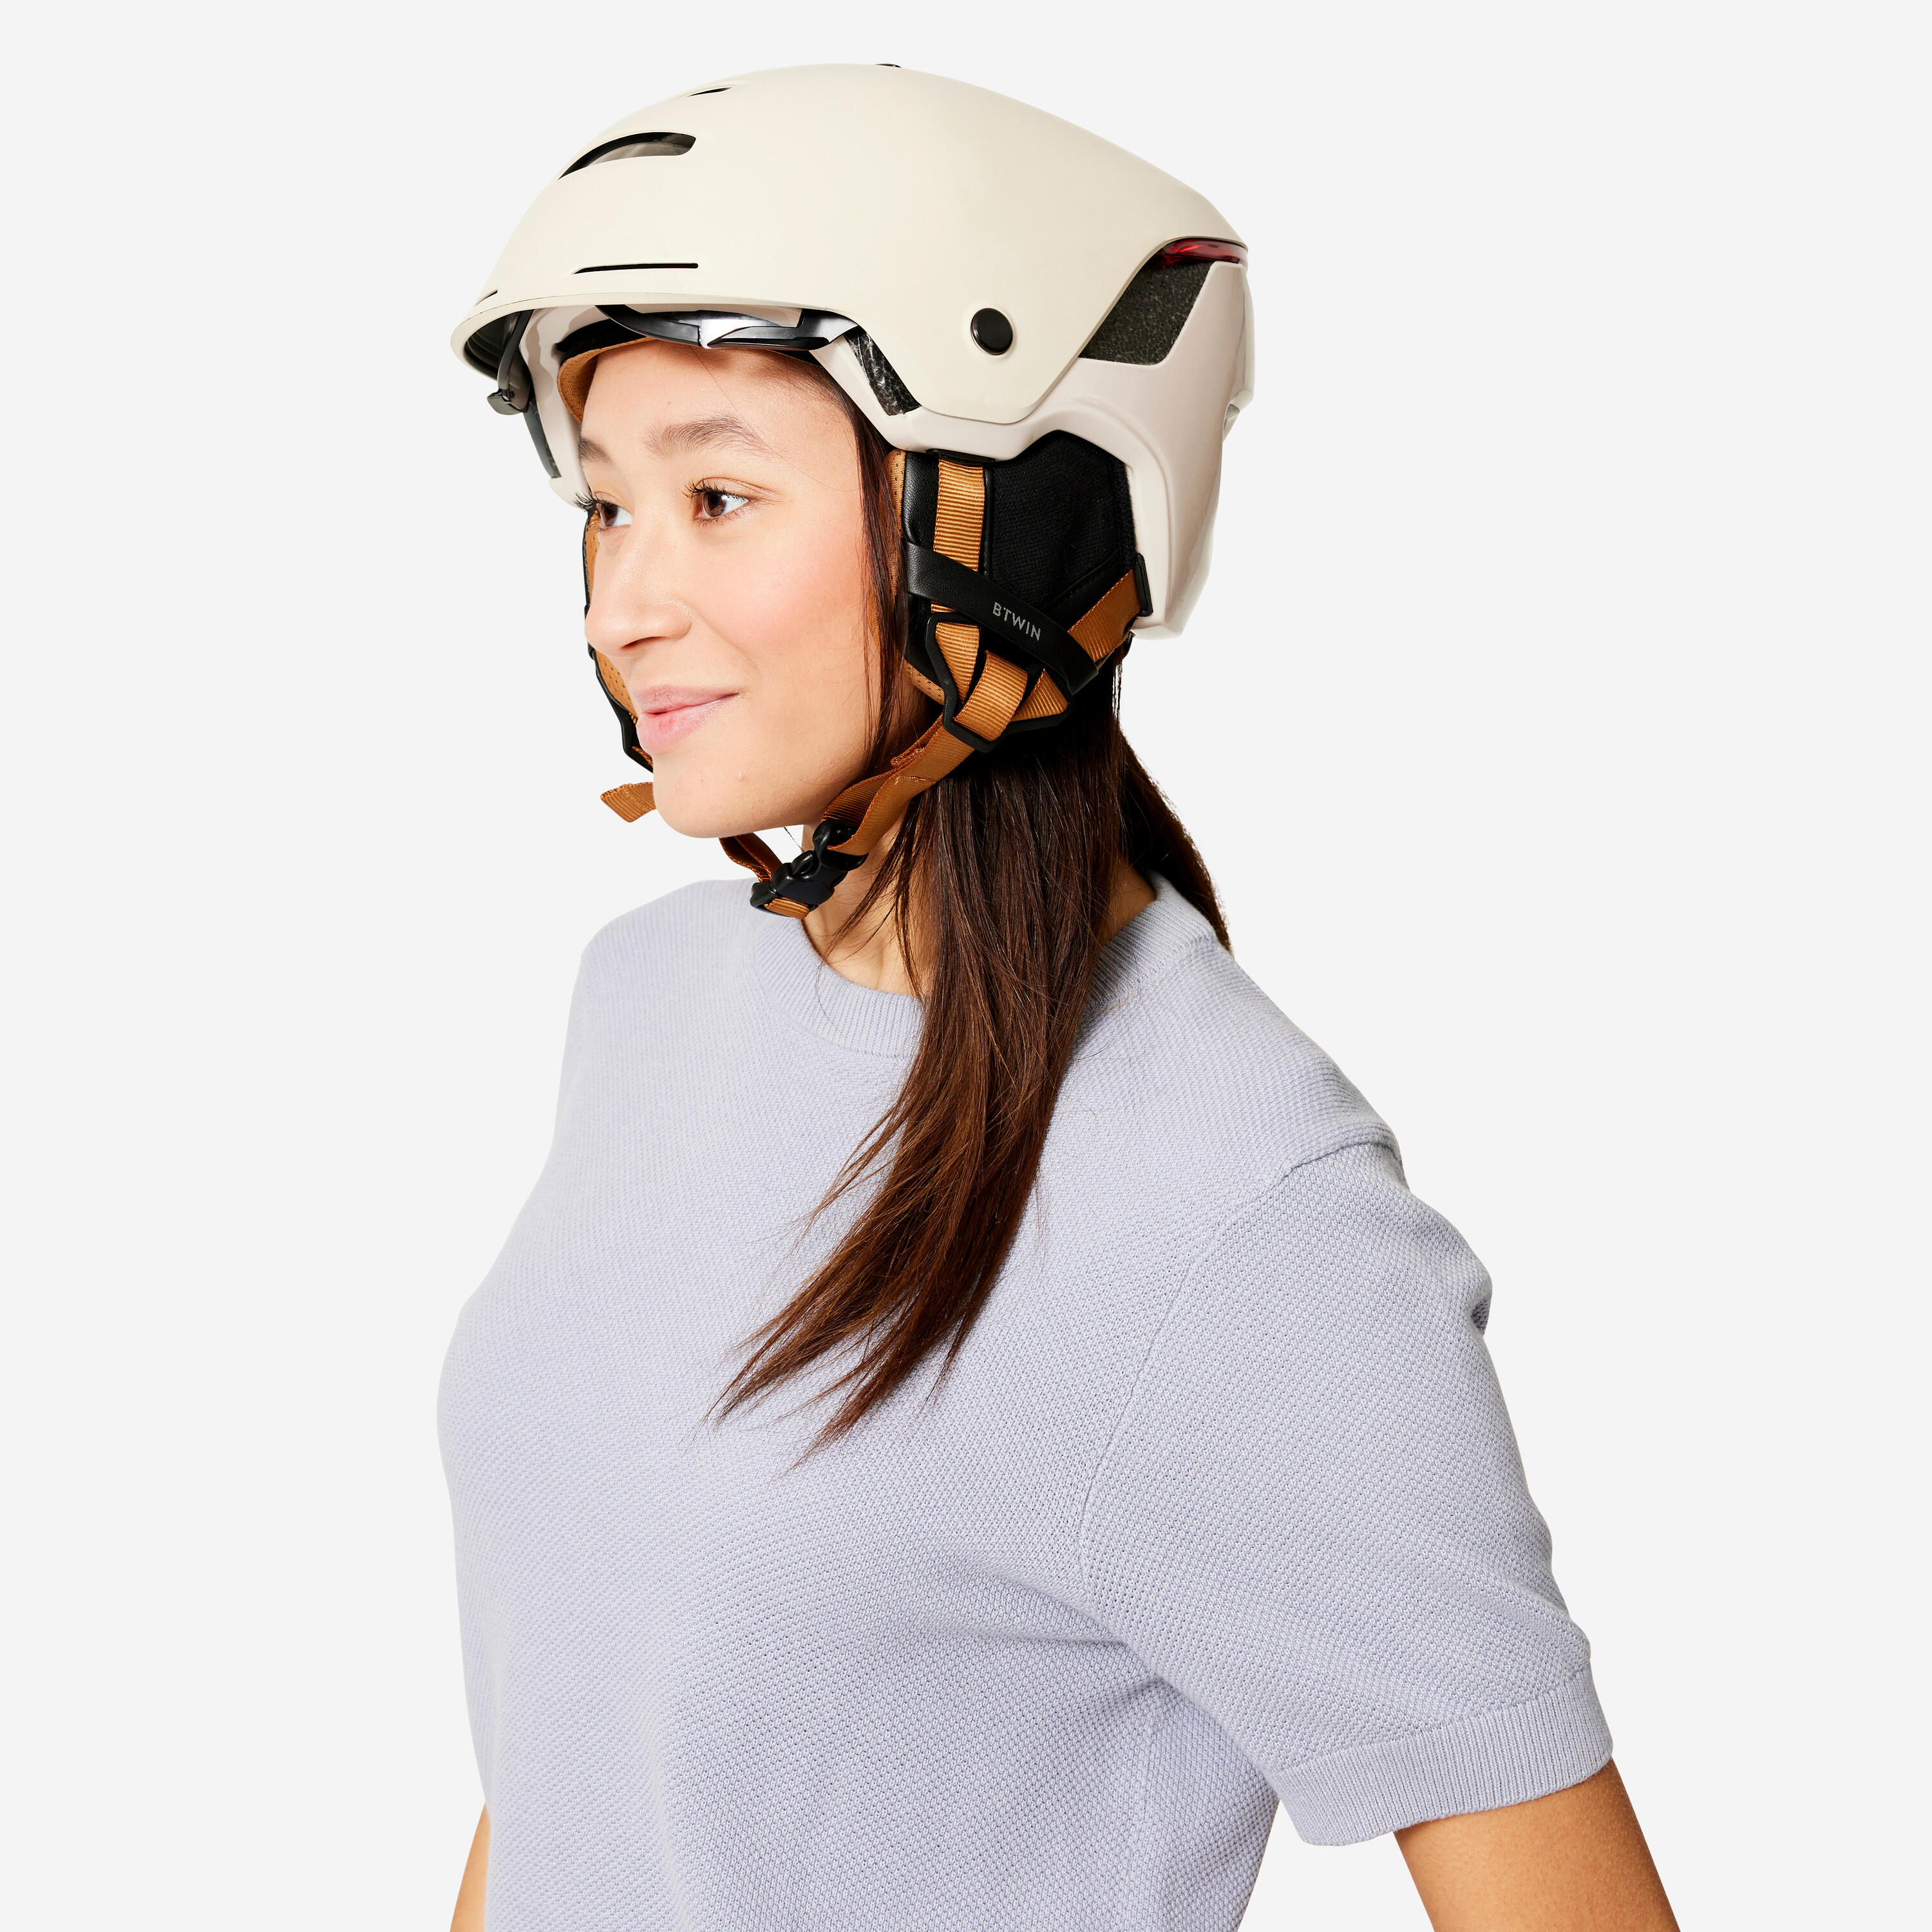 City Cycling Helmet with Visor and Rear Light 900 - Beige 6/11